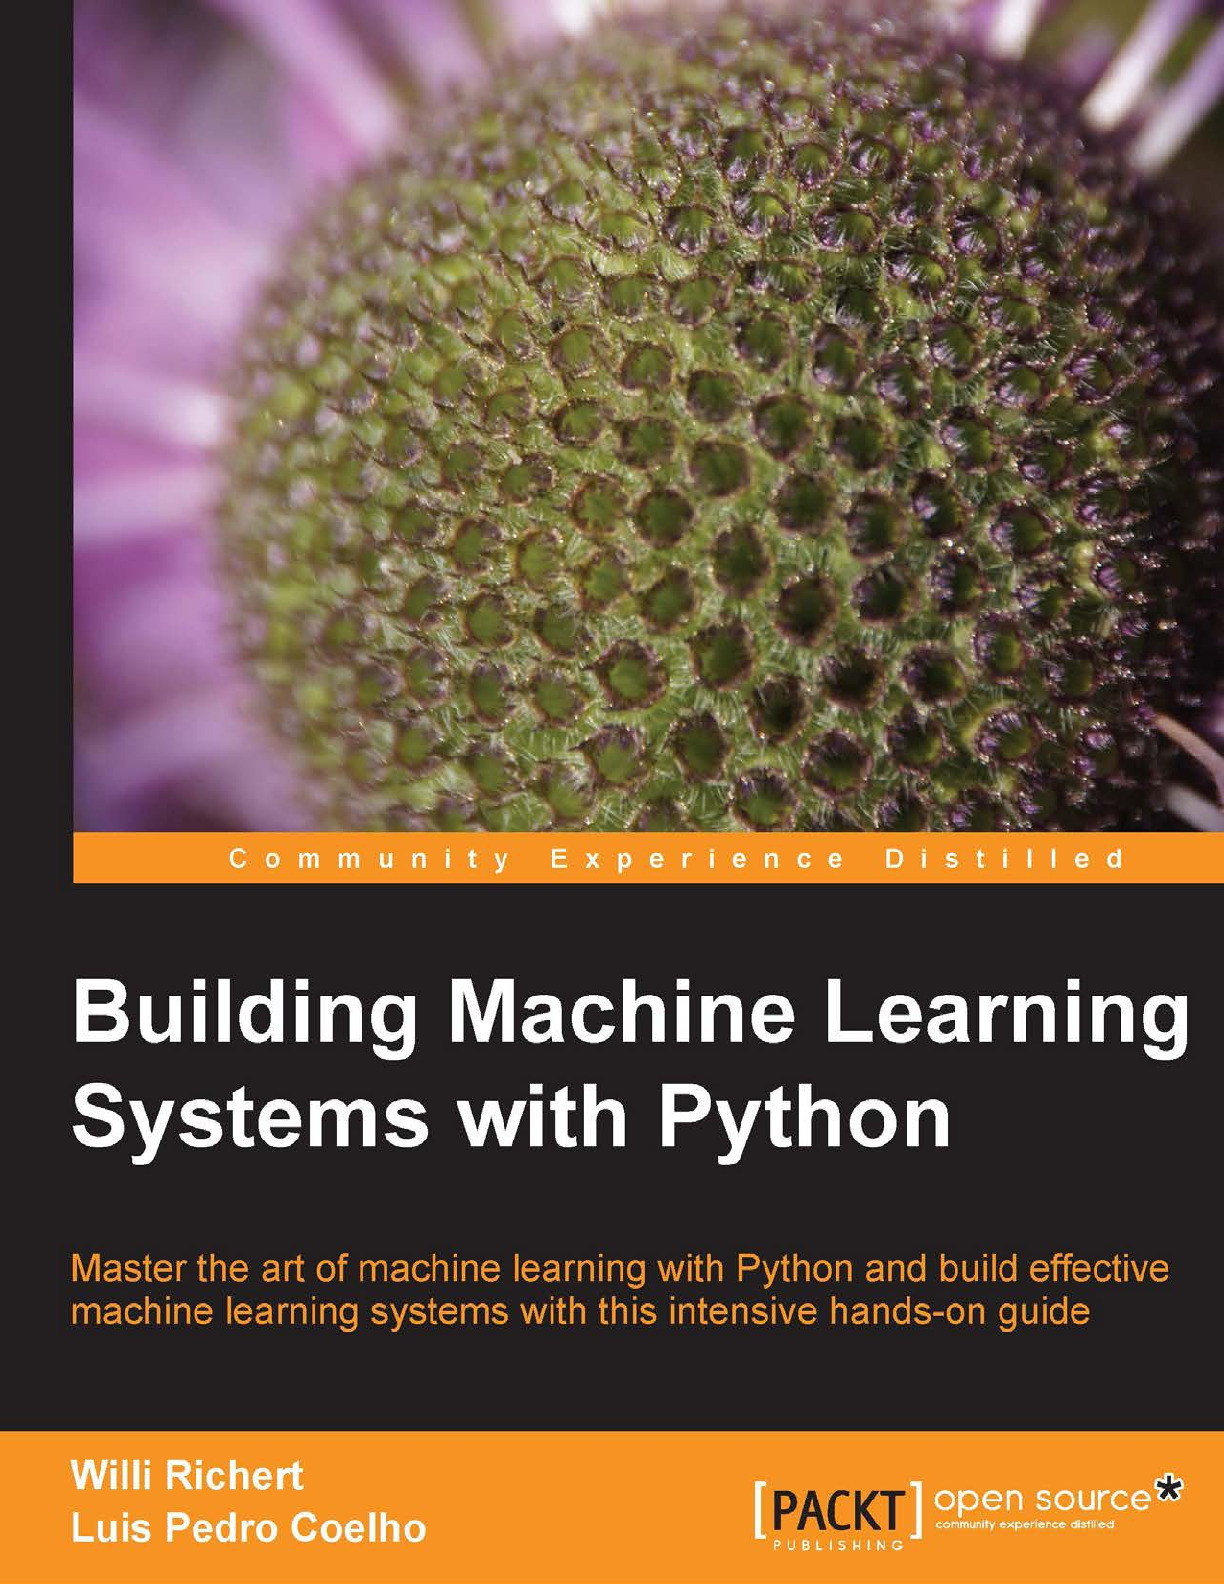 Building Machine Learning Systems with Python – Richert, Coelho